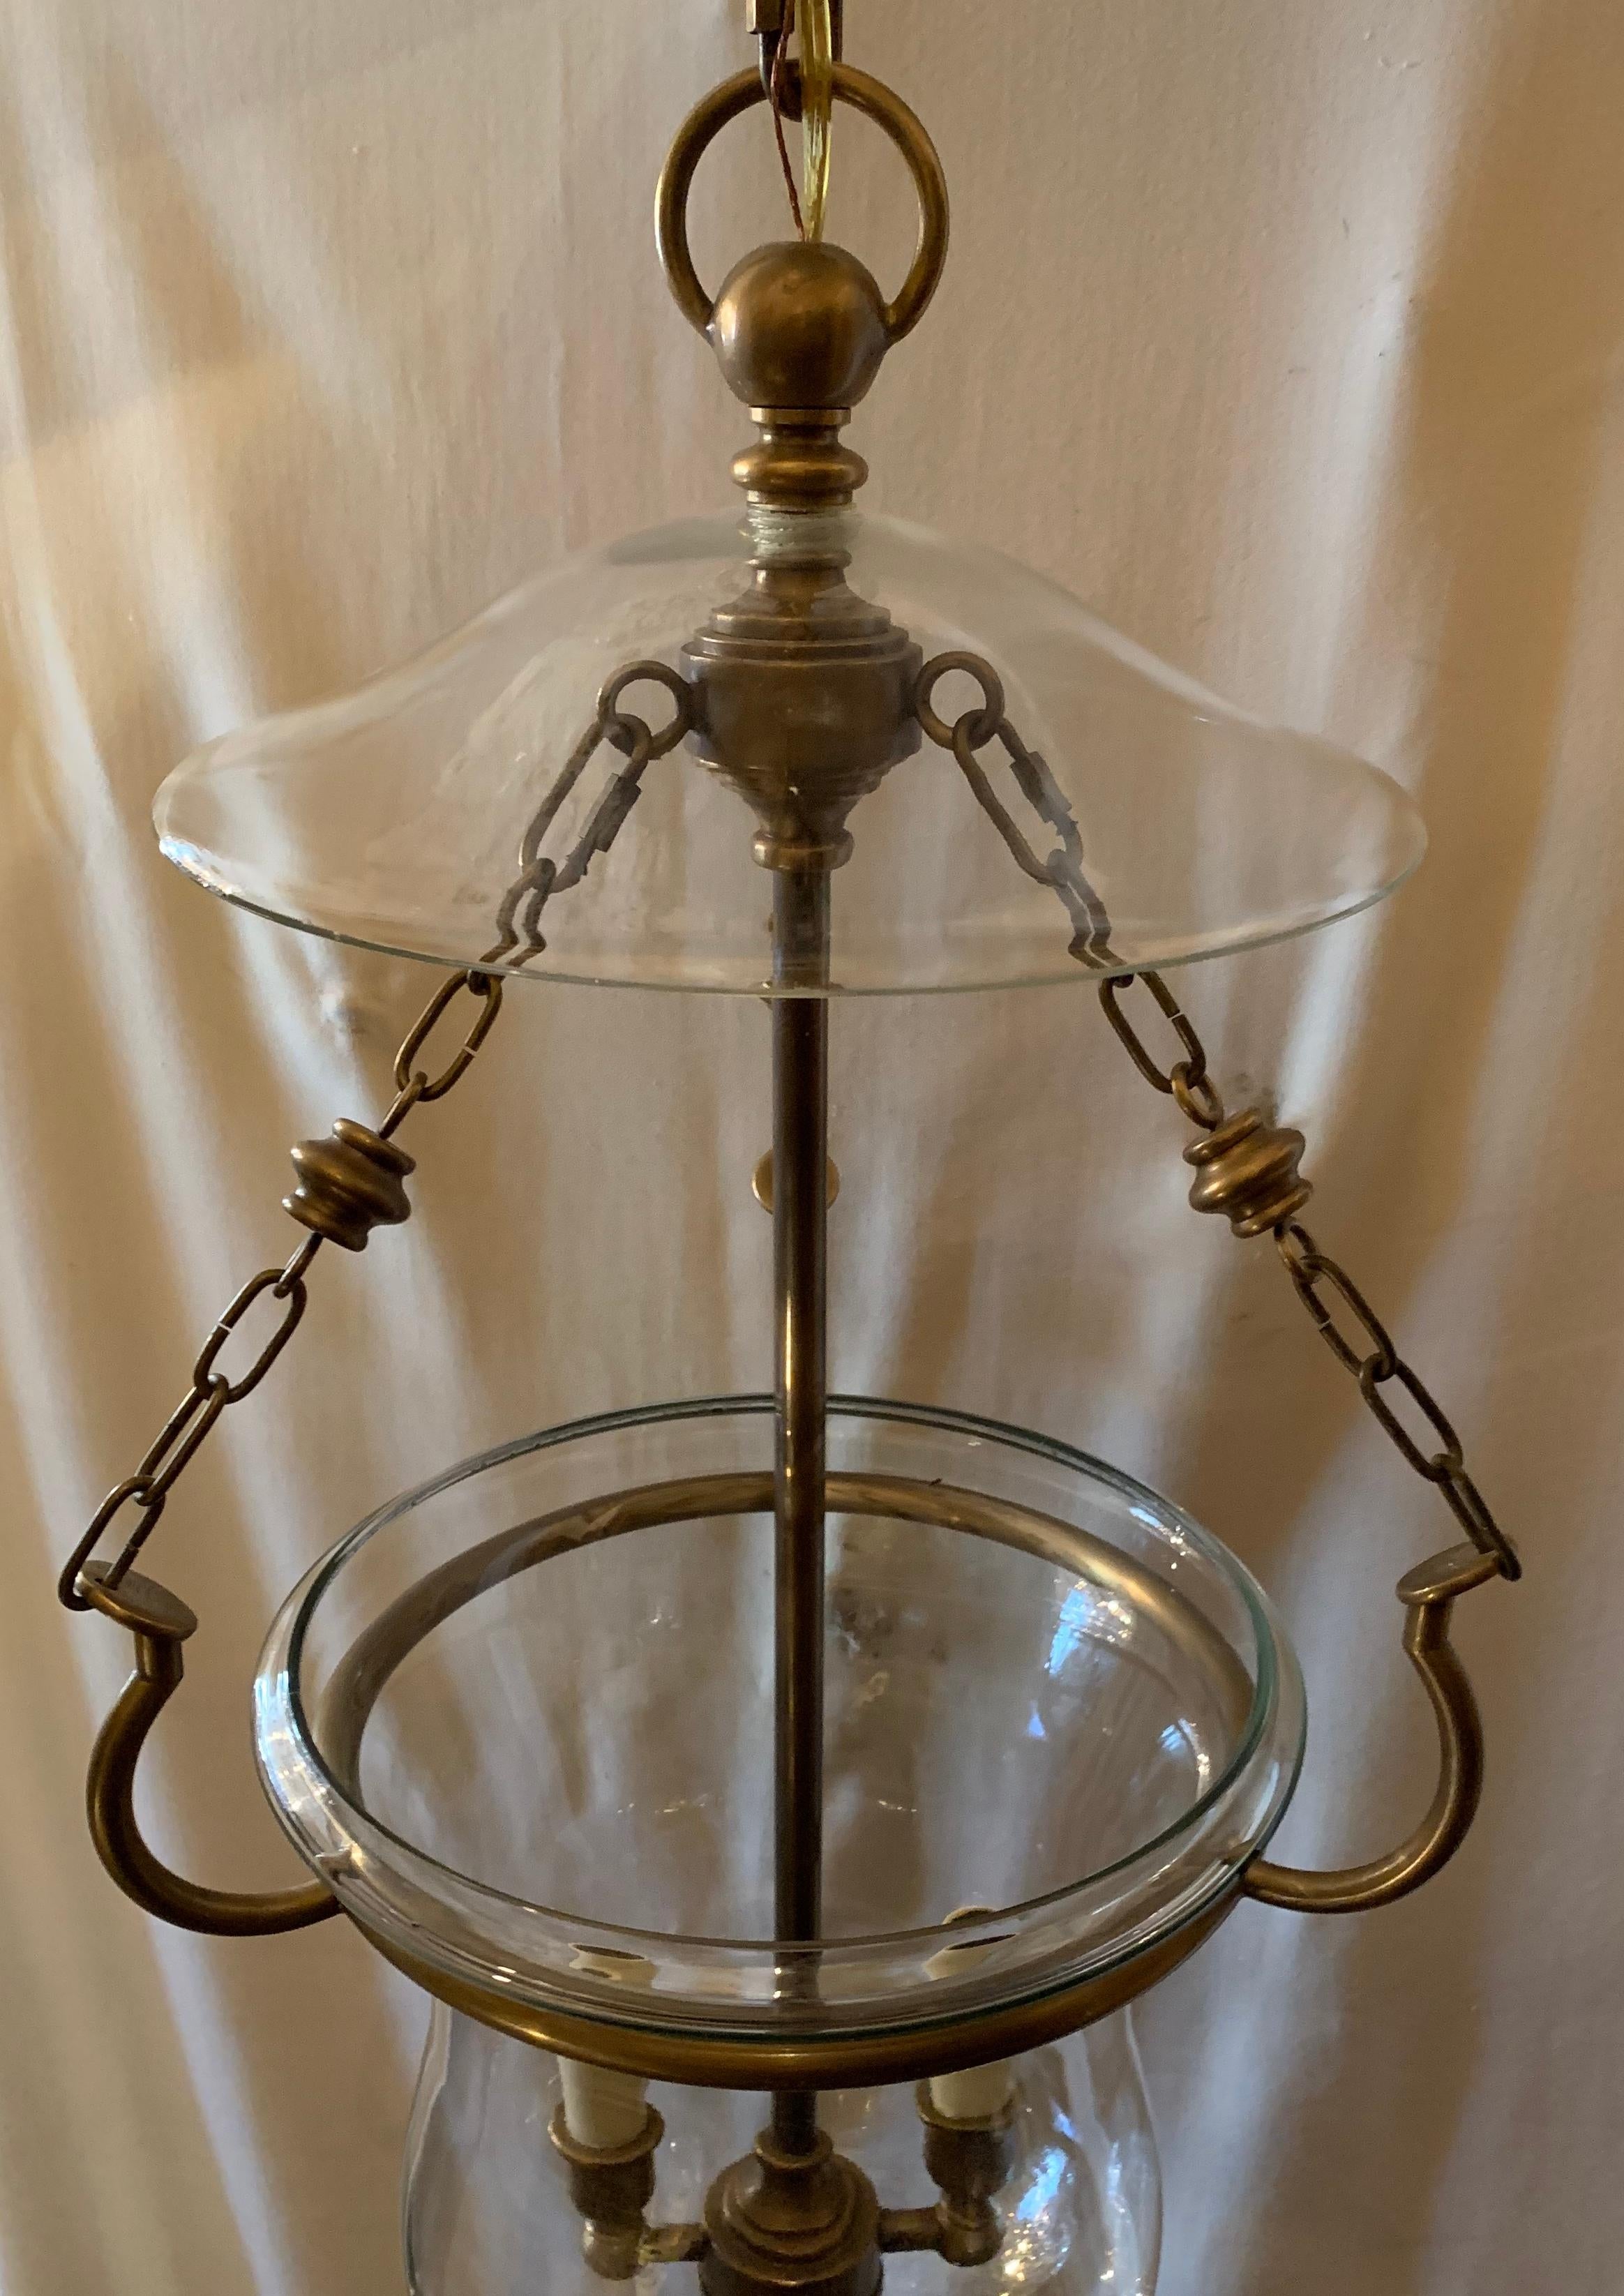 A handsome and fine quality blown glass and bronze bell jar lantern with 2 candelabra lights, this fixture we are told is vintage Vaughan, made in England.
Wire has been updated and comes with chain and canopy as well as mounting hardware for